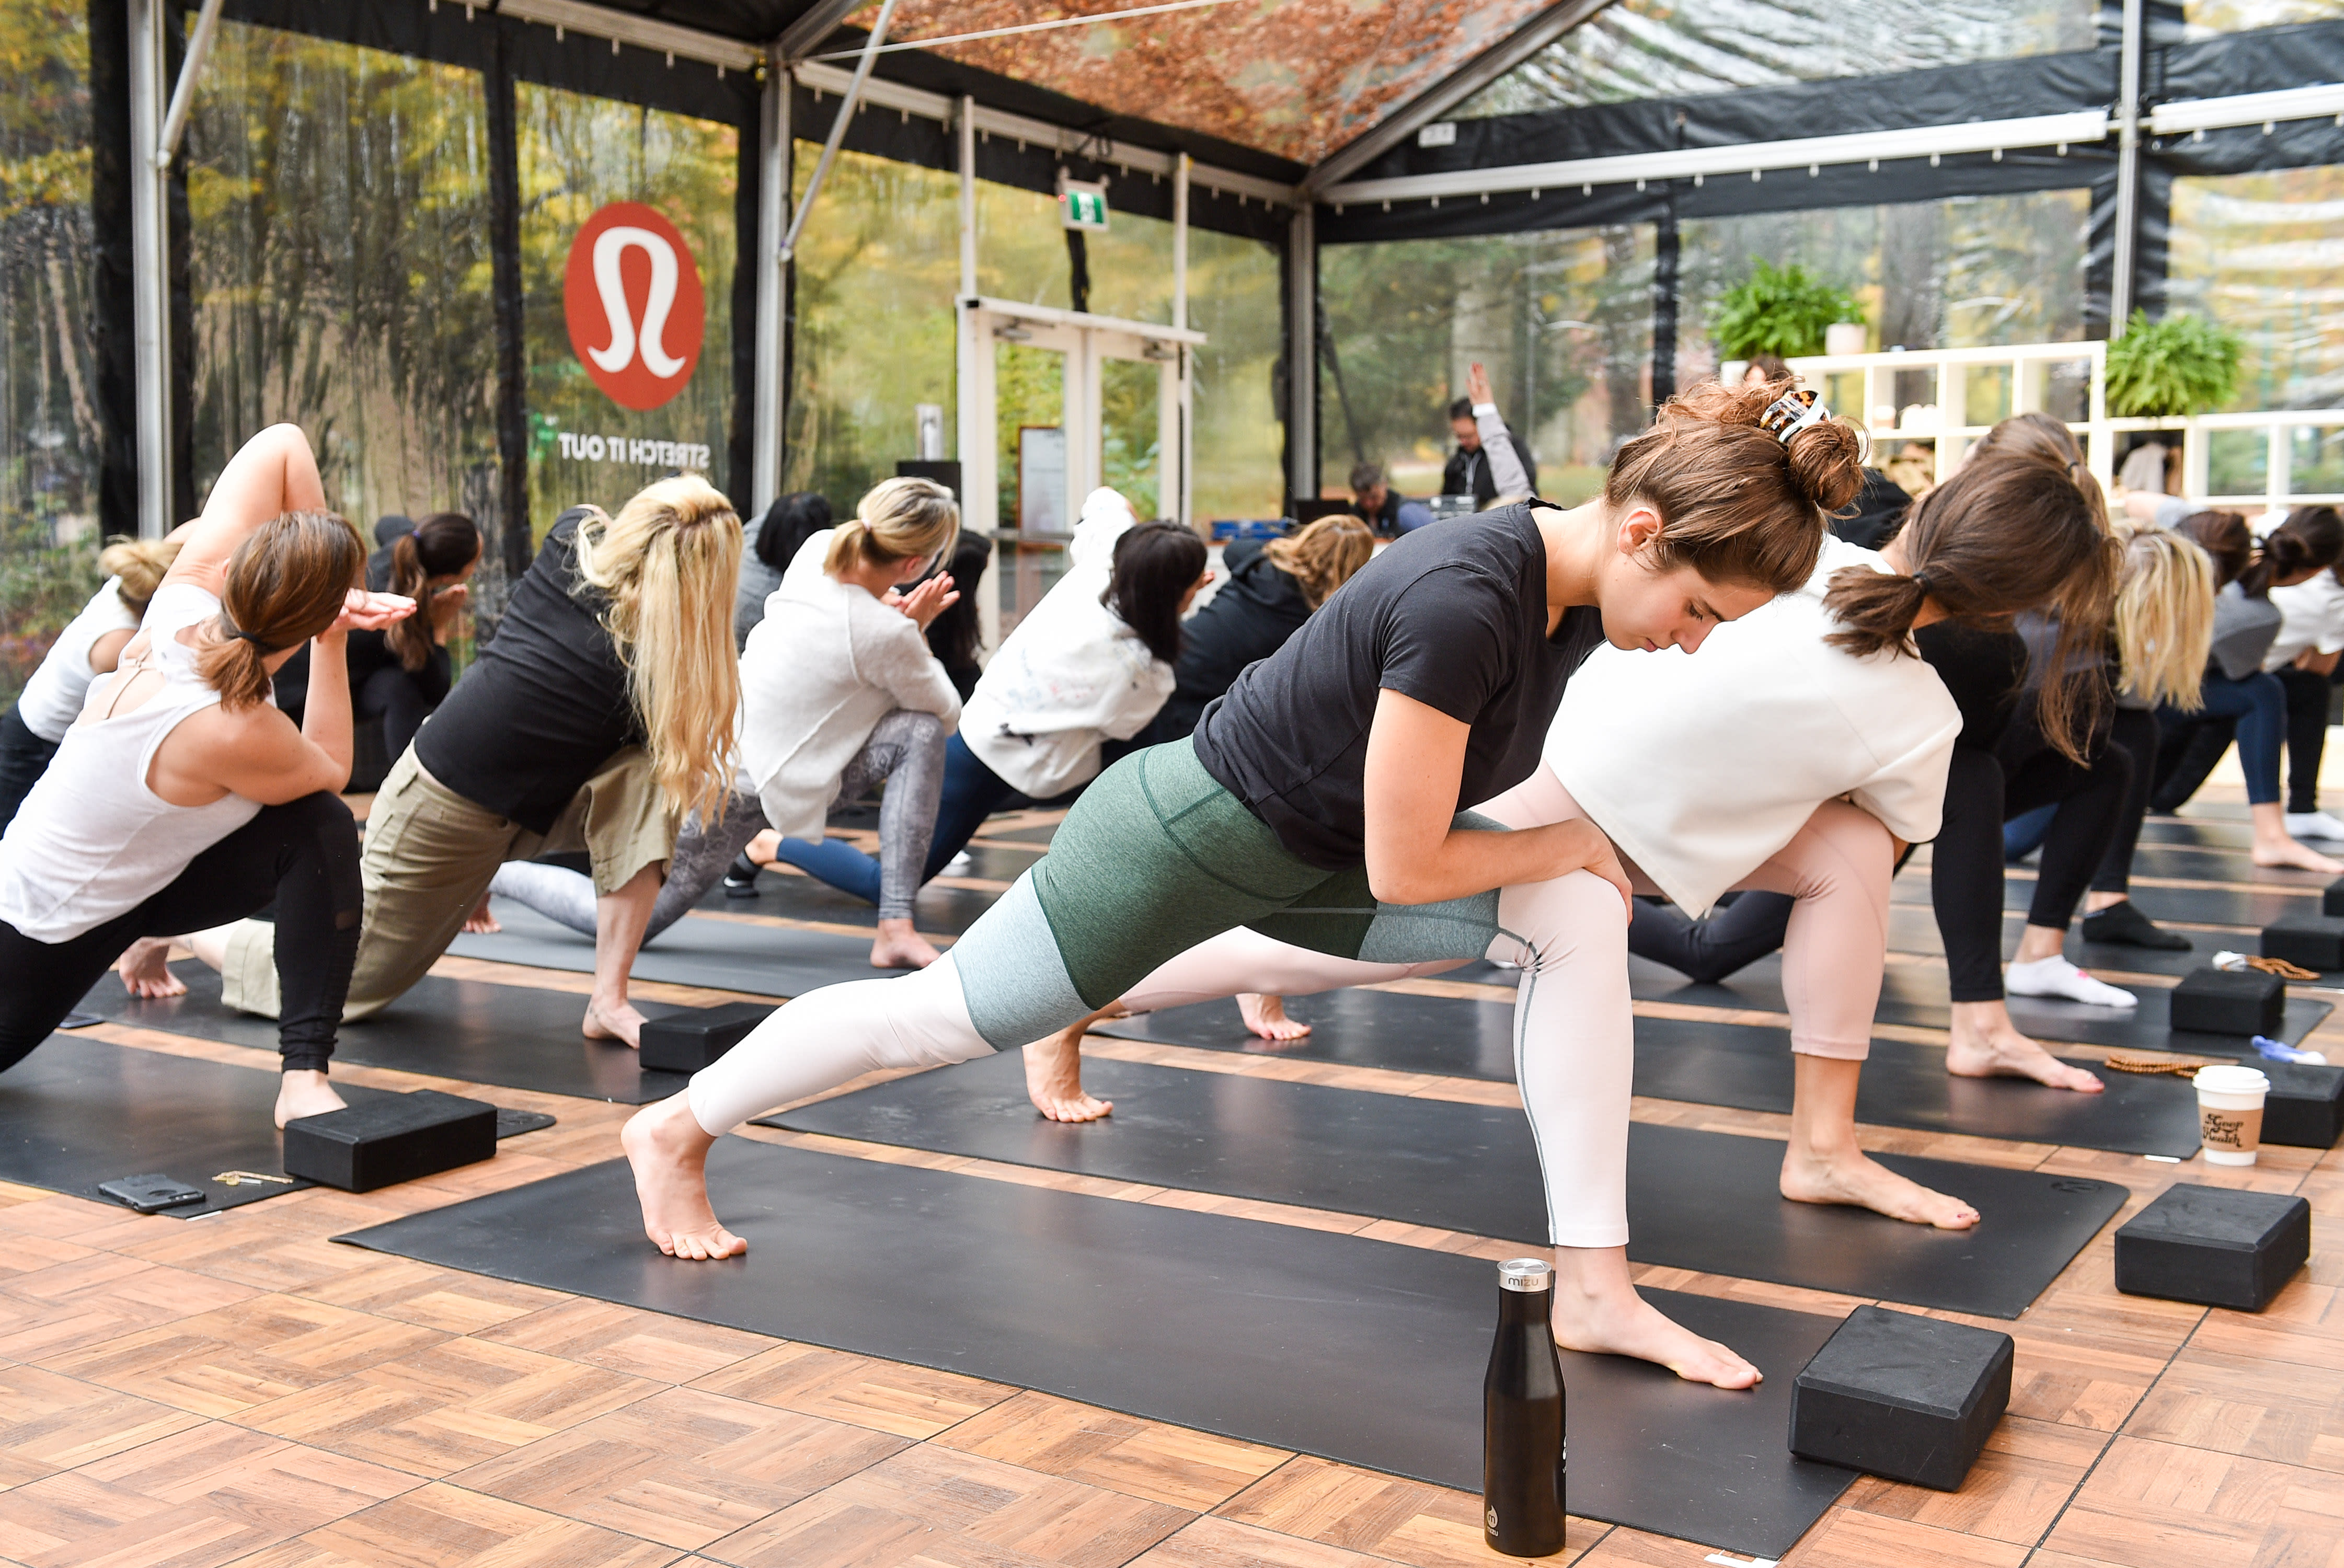 Watch this level in Lululemon as fellow athleisure giant Nike reports